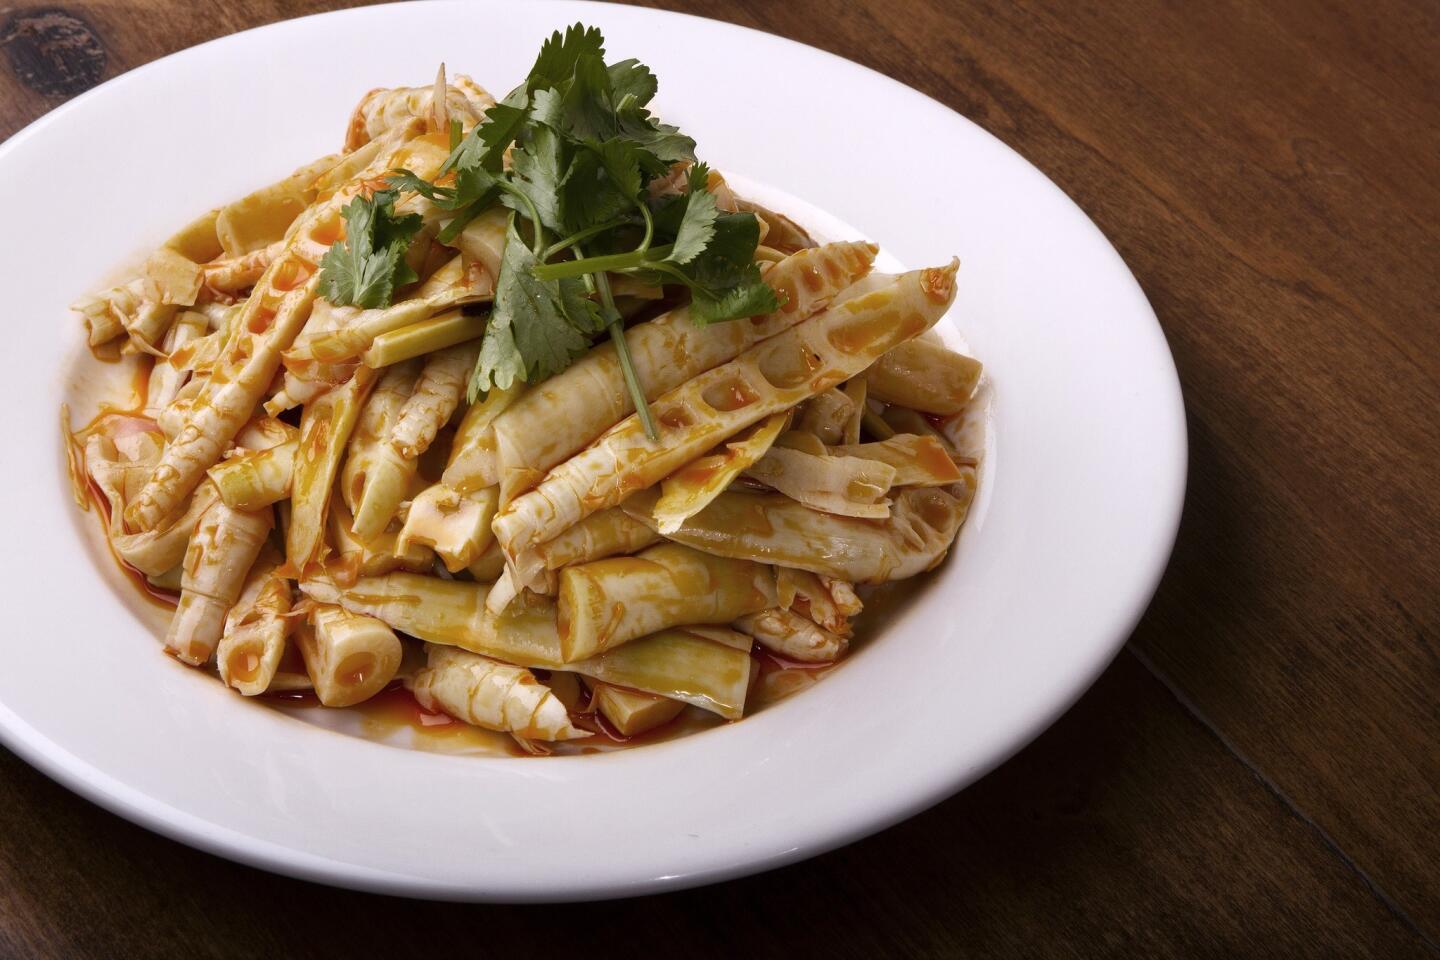 The fresh bamboo shoots are lightly dressed with chile.